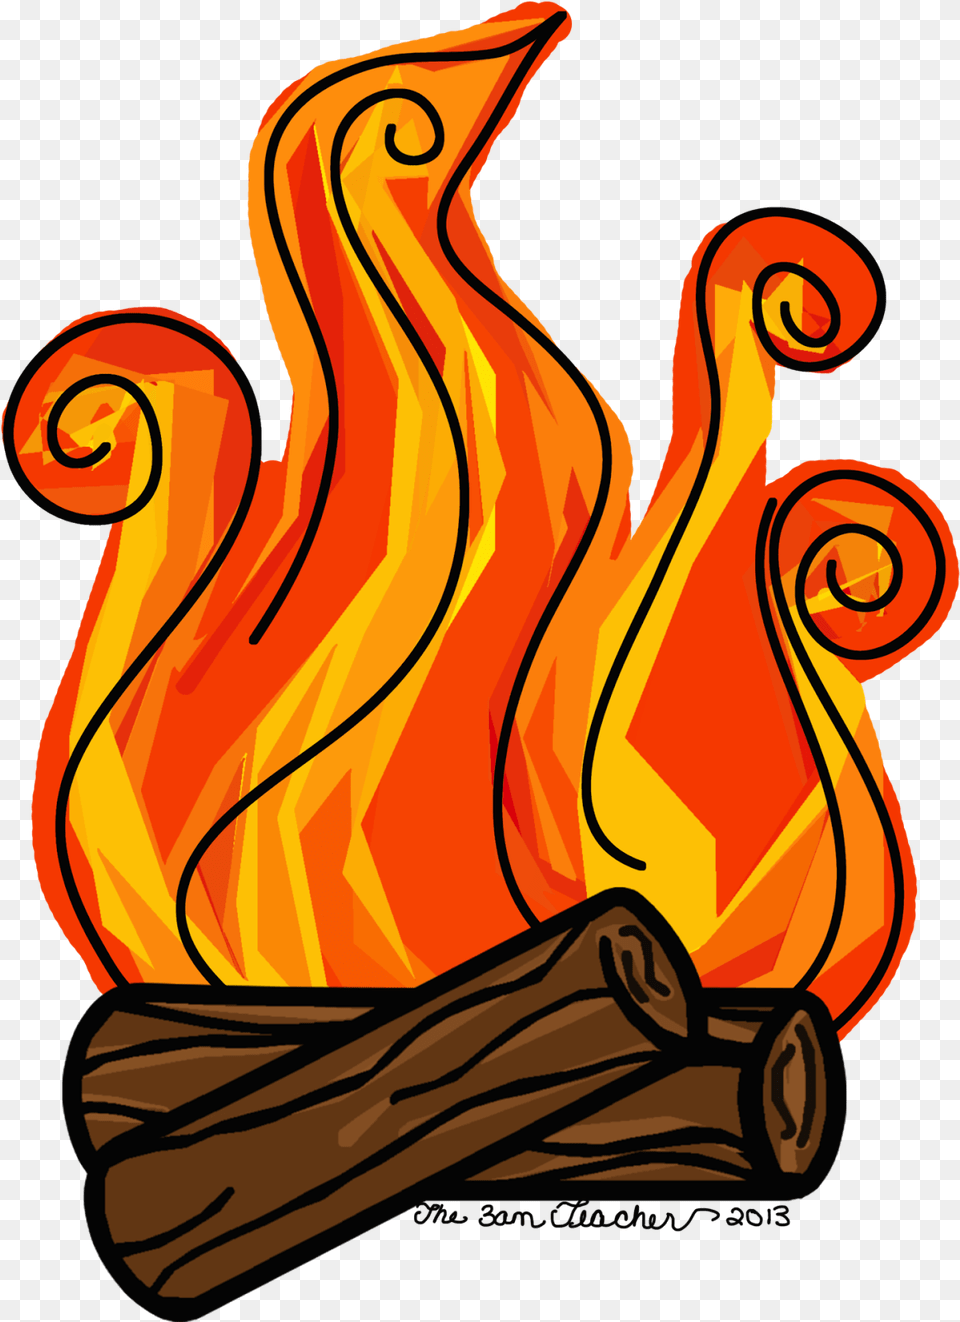 Campfire Clipart Fireplace Fire Fire In Fireplace Clip Art Clip Art Fireplace Flames, Flame Png Image